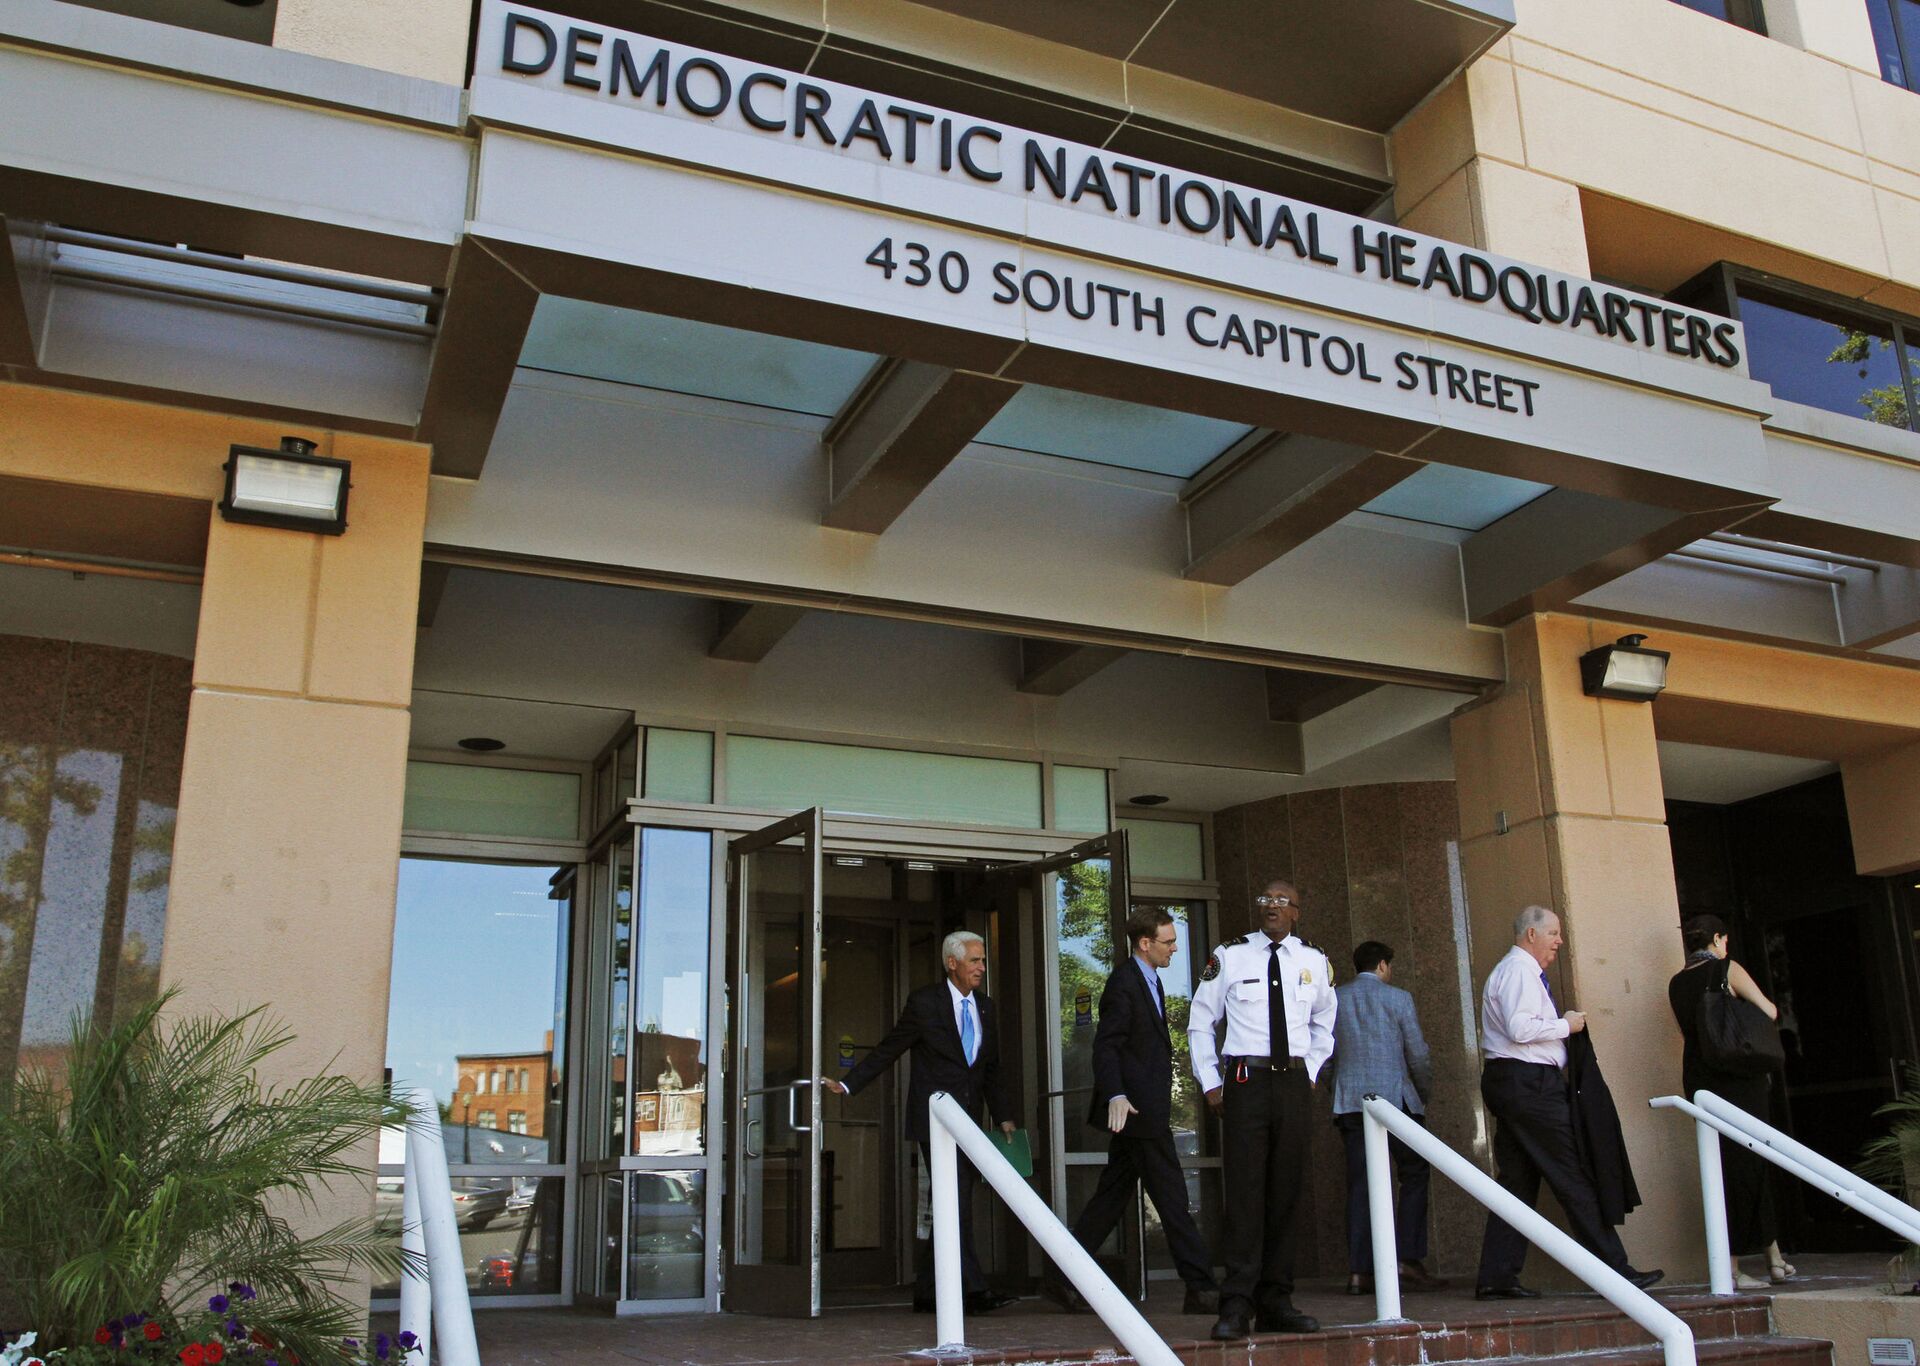  This Tuesday, June 14, 2016 file photo shows the entrance to the Democratic National Committee (DNC) headquarters in Washington - Sputnik International, 1920, 07.09.2021